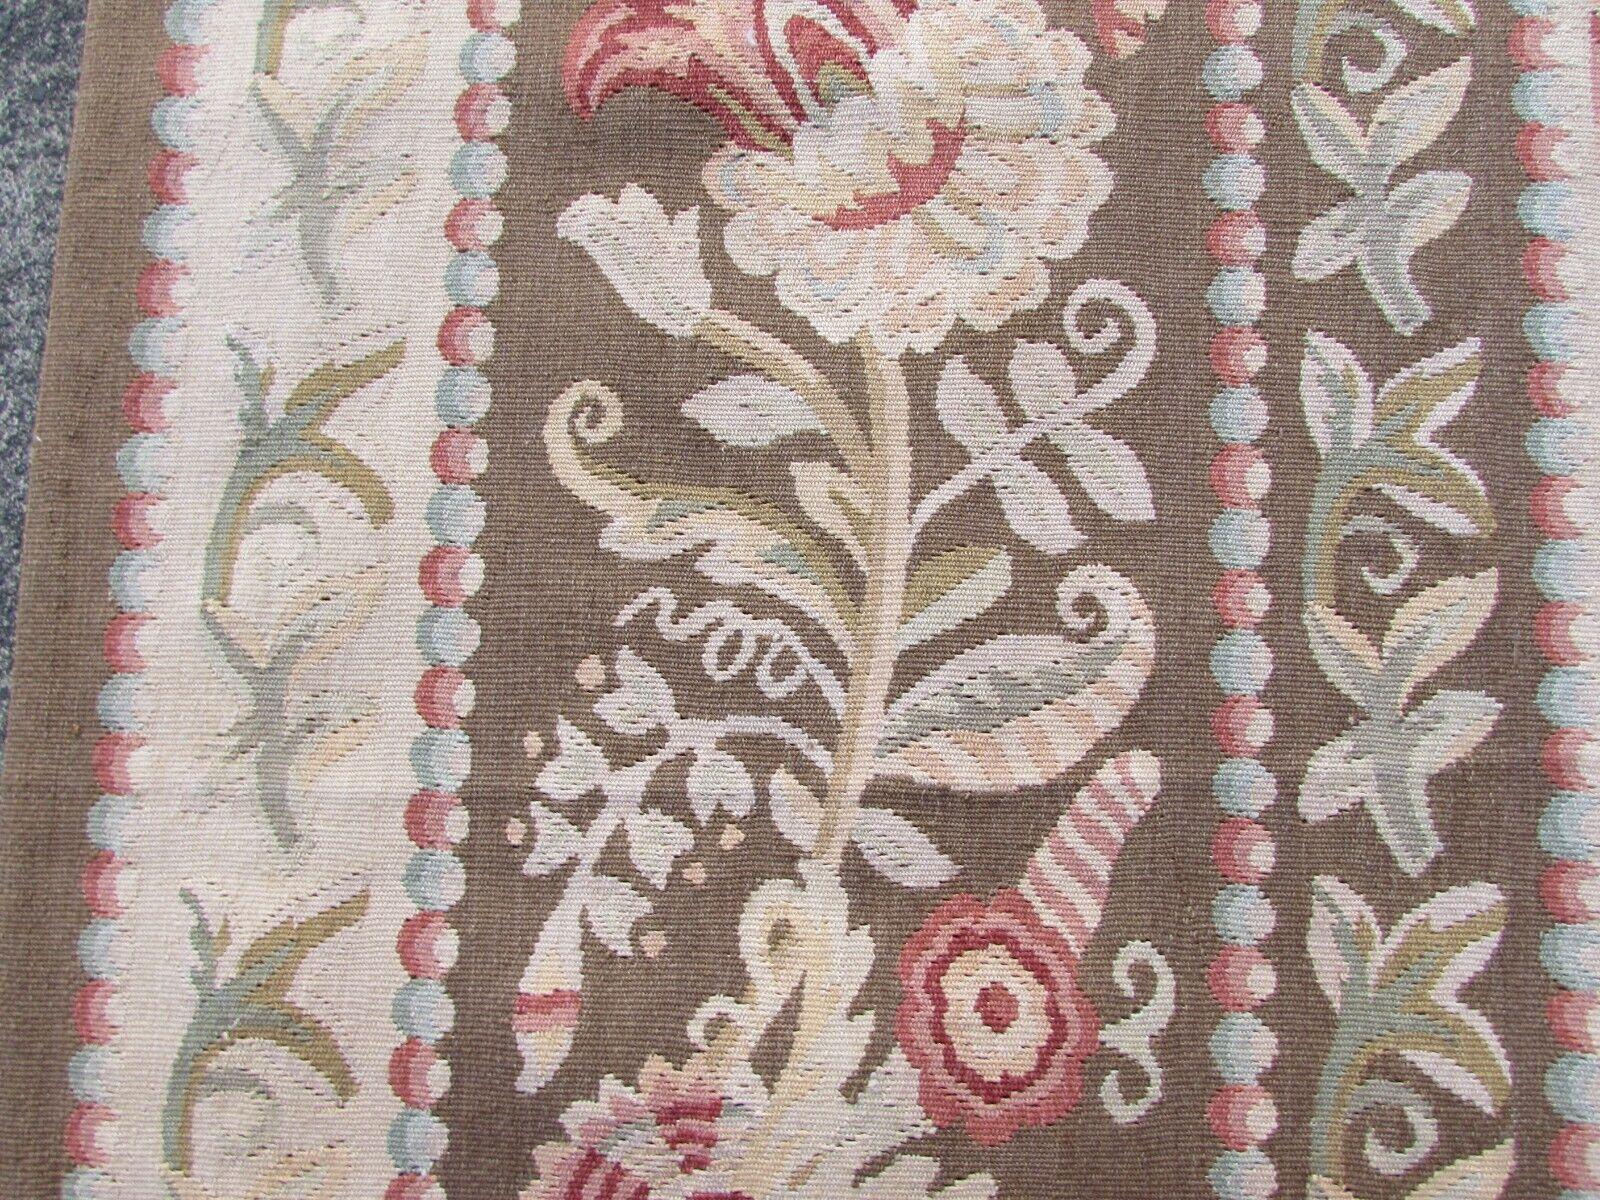 Handmade Vintage French Aubusson Flatweave Rug 9.9' x 14.2', 1970s, 1Q42 For Sale 3